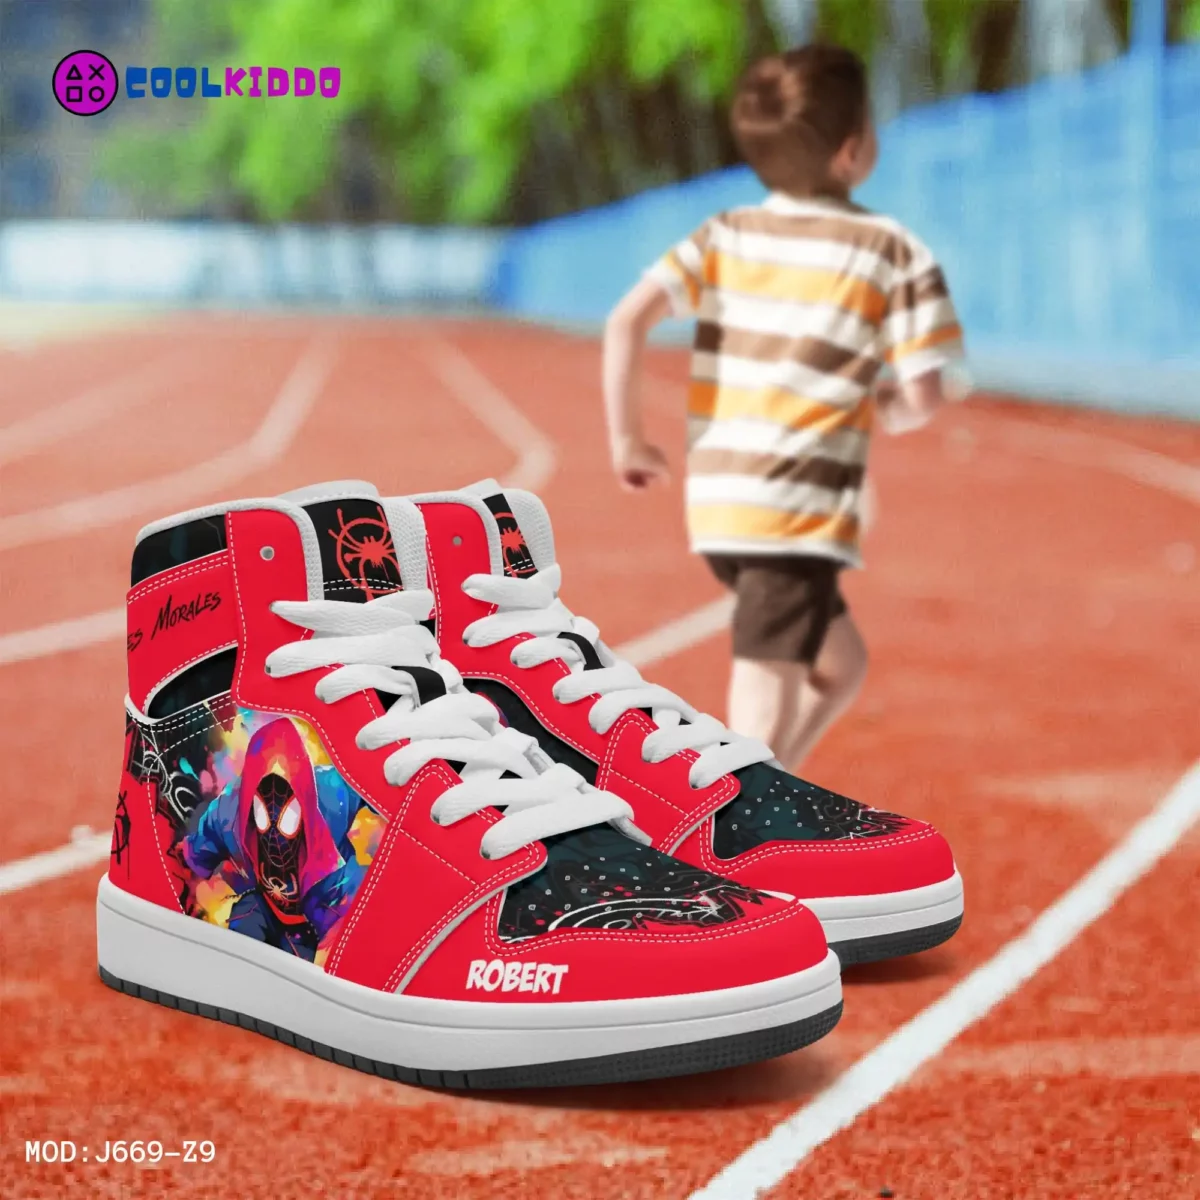 Personalized Spiderman Sneakers for Kids | Miles Morales Spider Verse Character High-Top Leather Black and Red Shoes Cool Kiddo 16